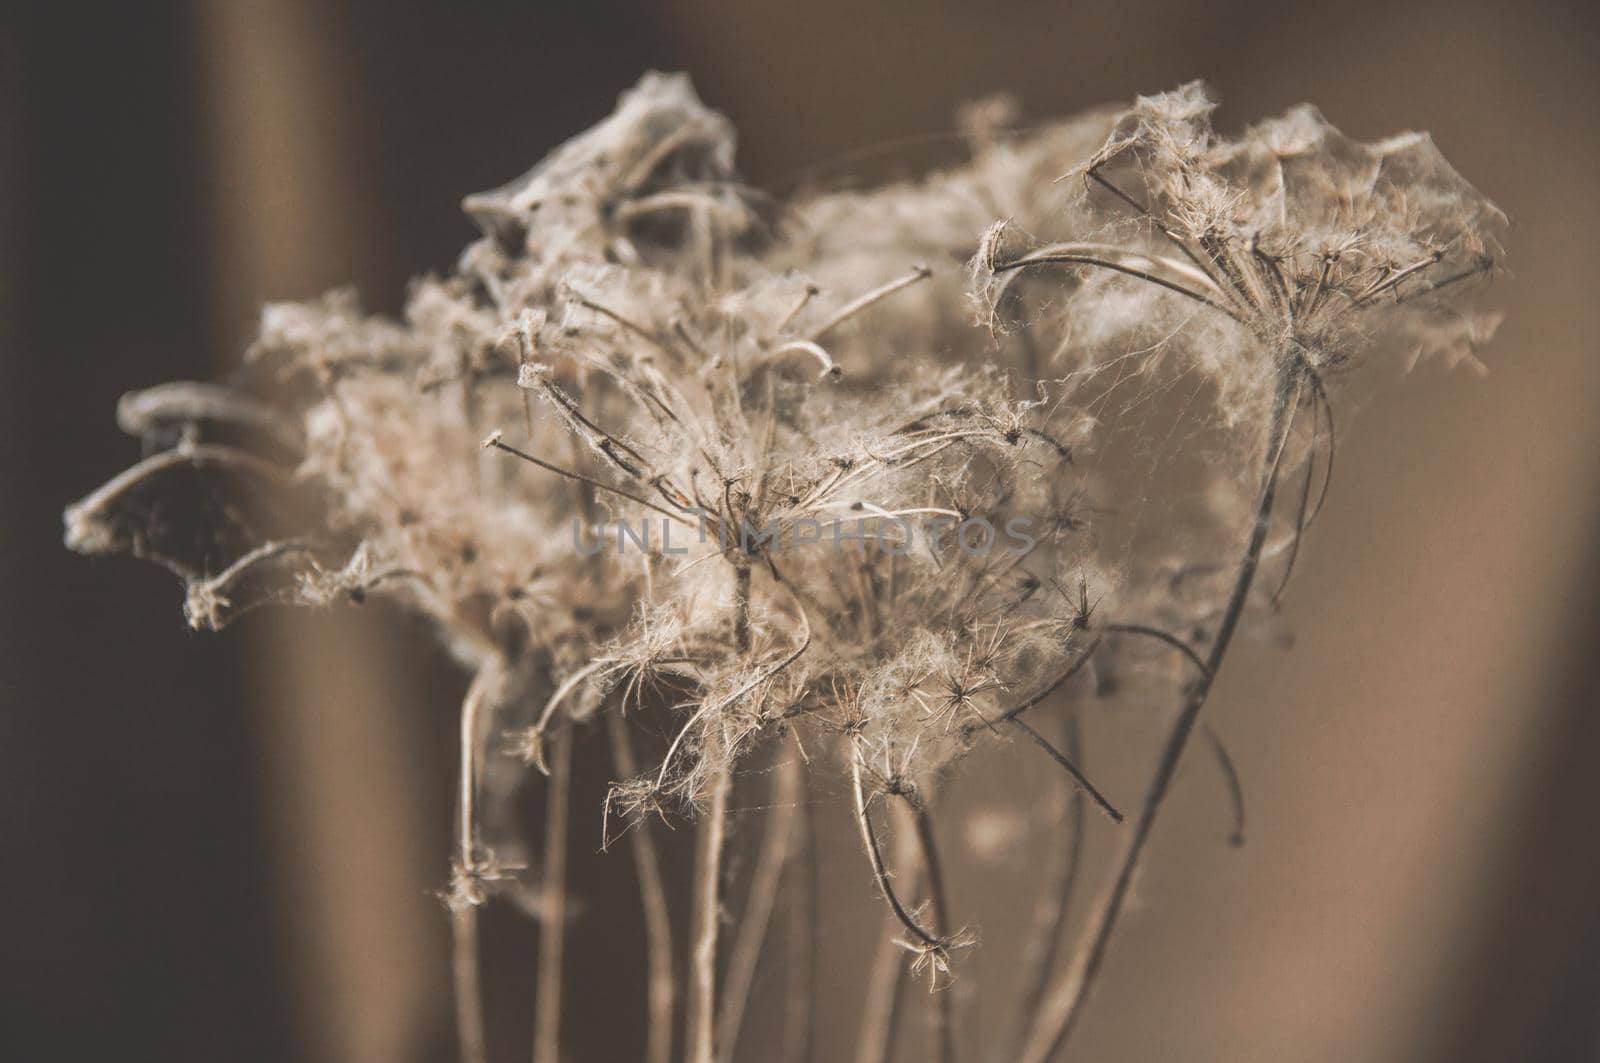 bouquet of dry wild flowers entangled in cobwebs by ozornina